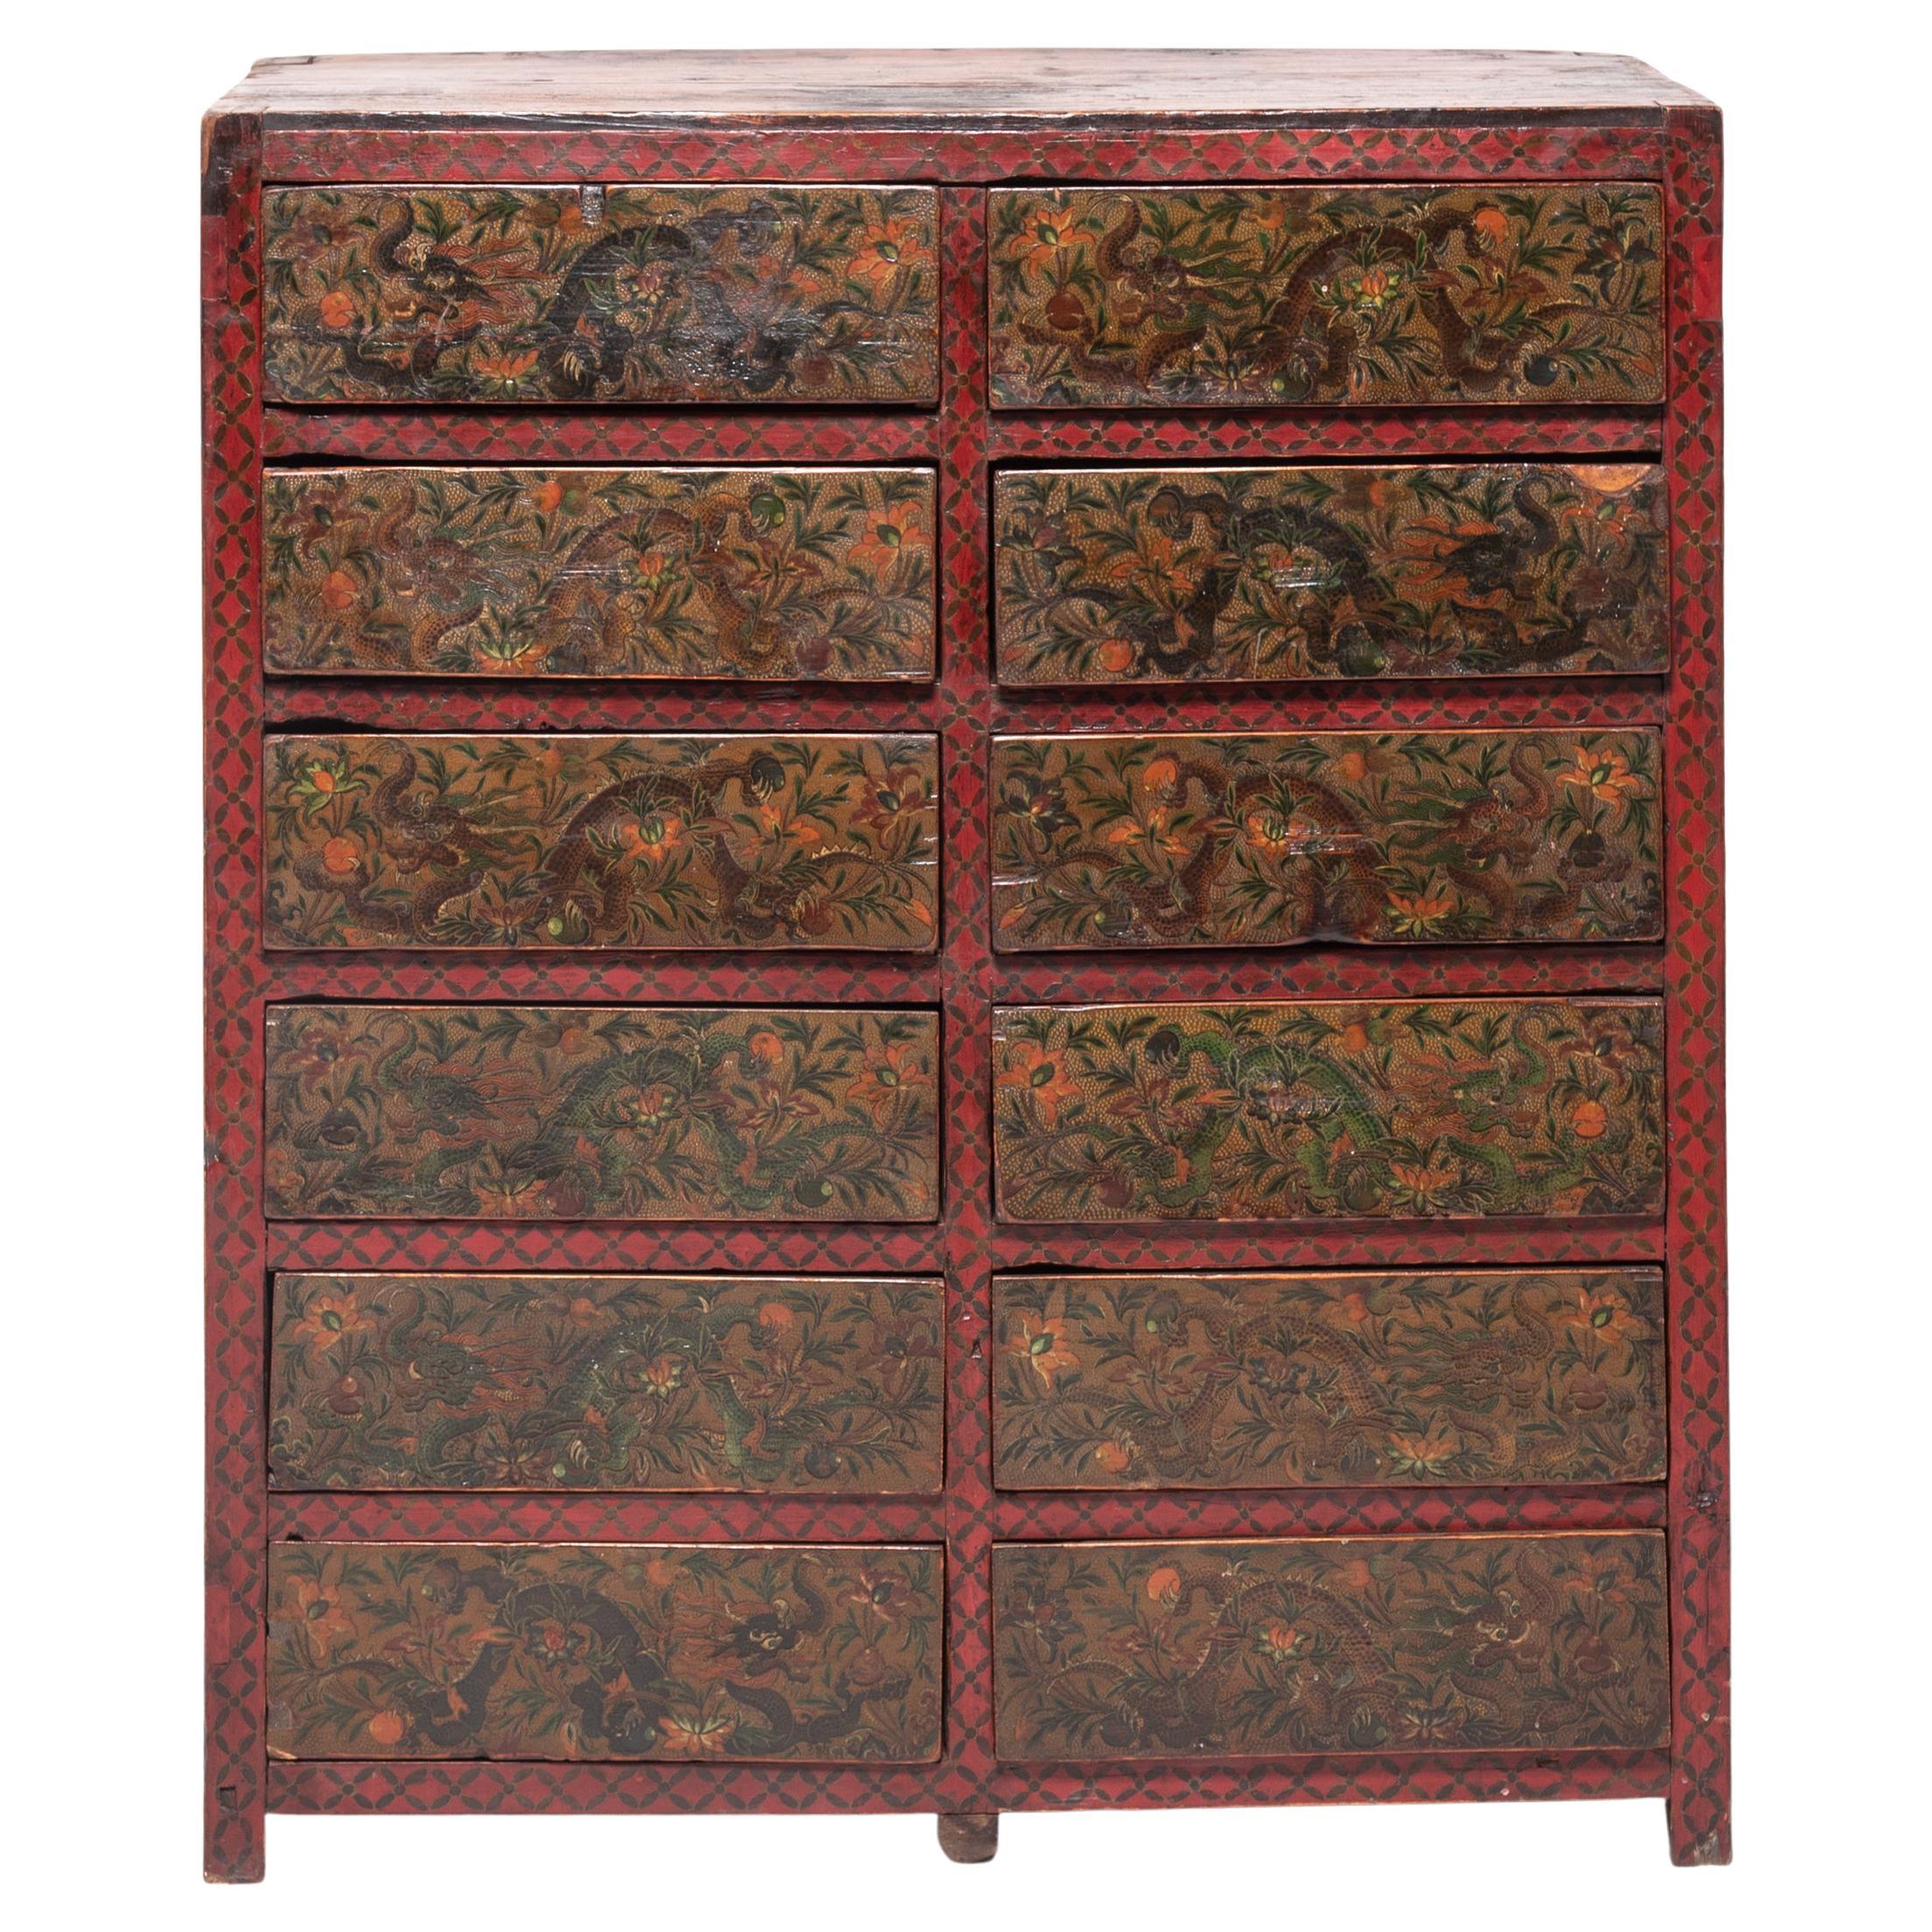 Tibetan Painted Dragon Chest of Drawers, c. 1850